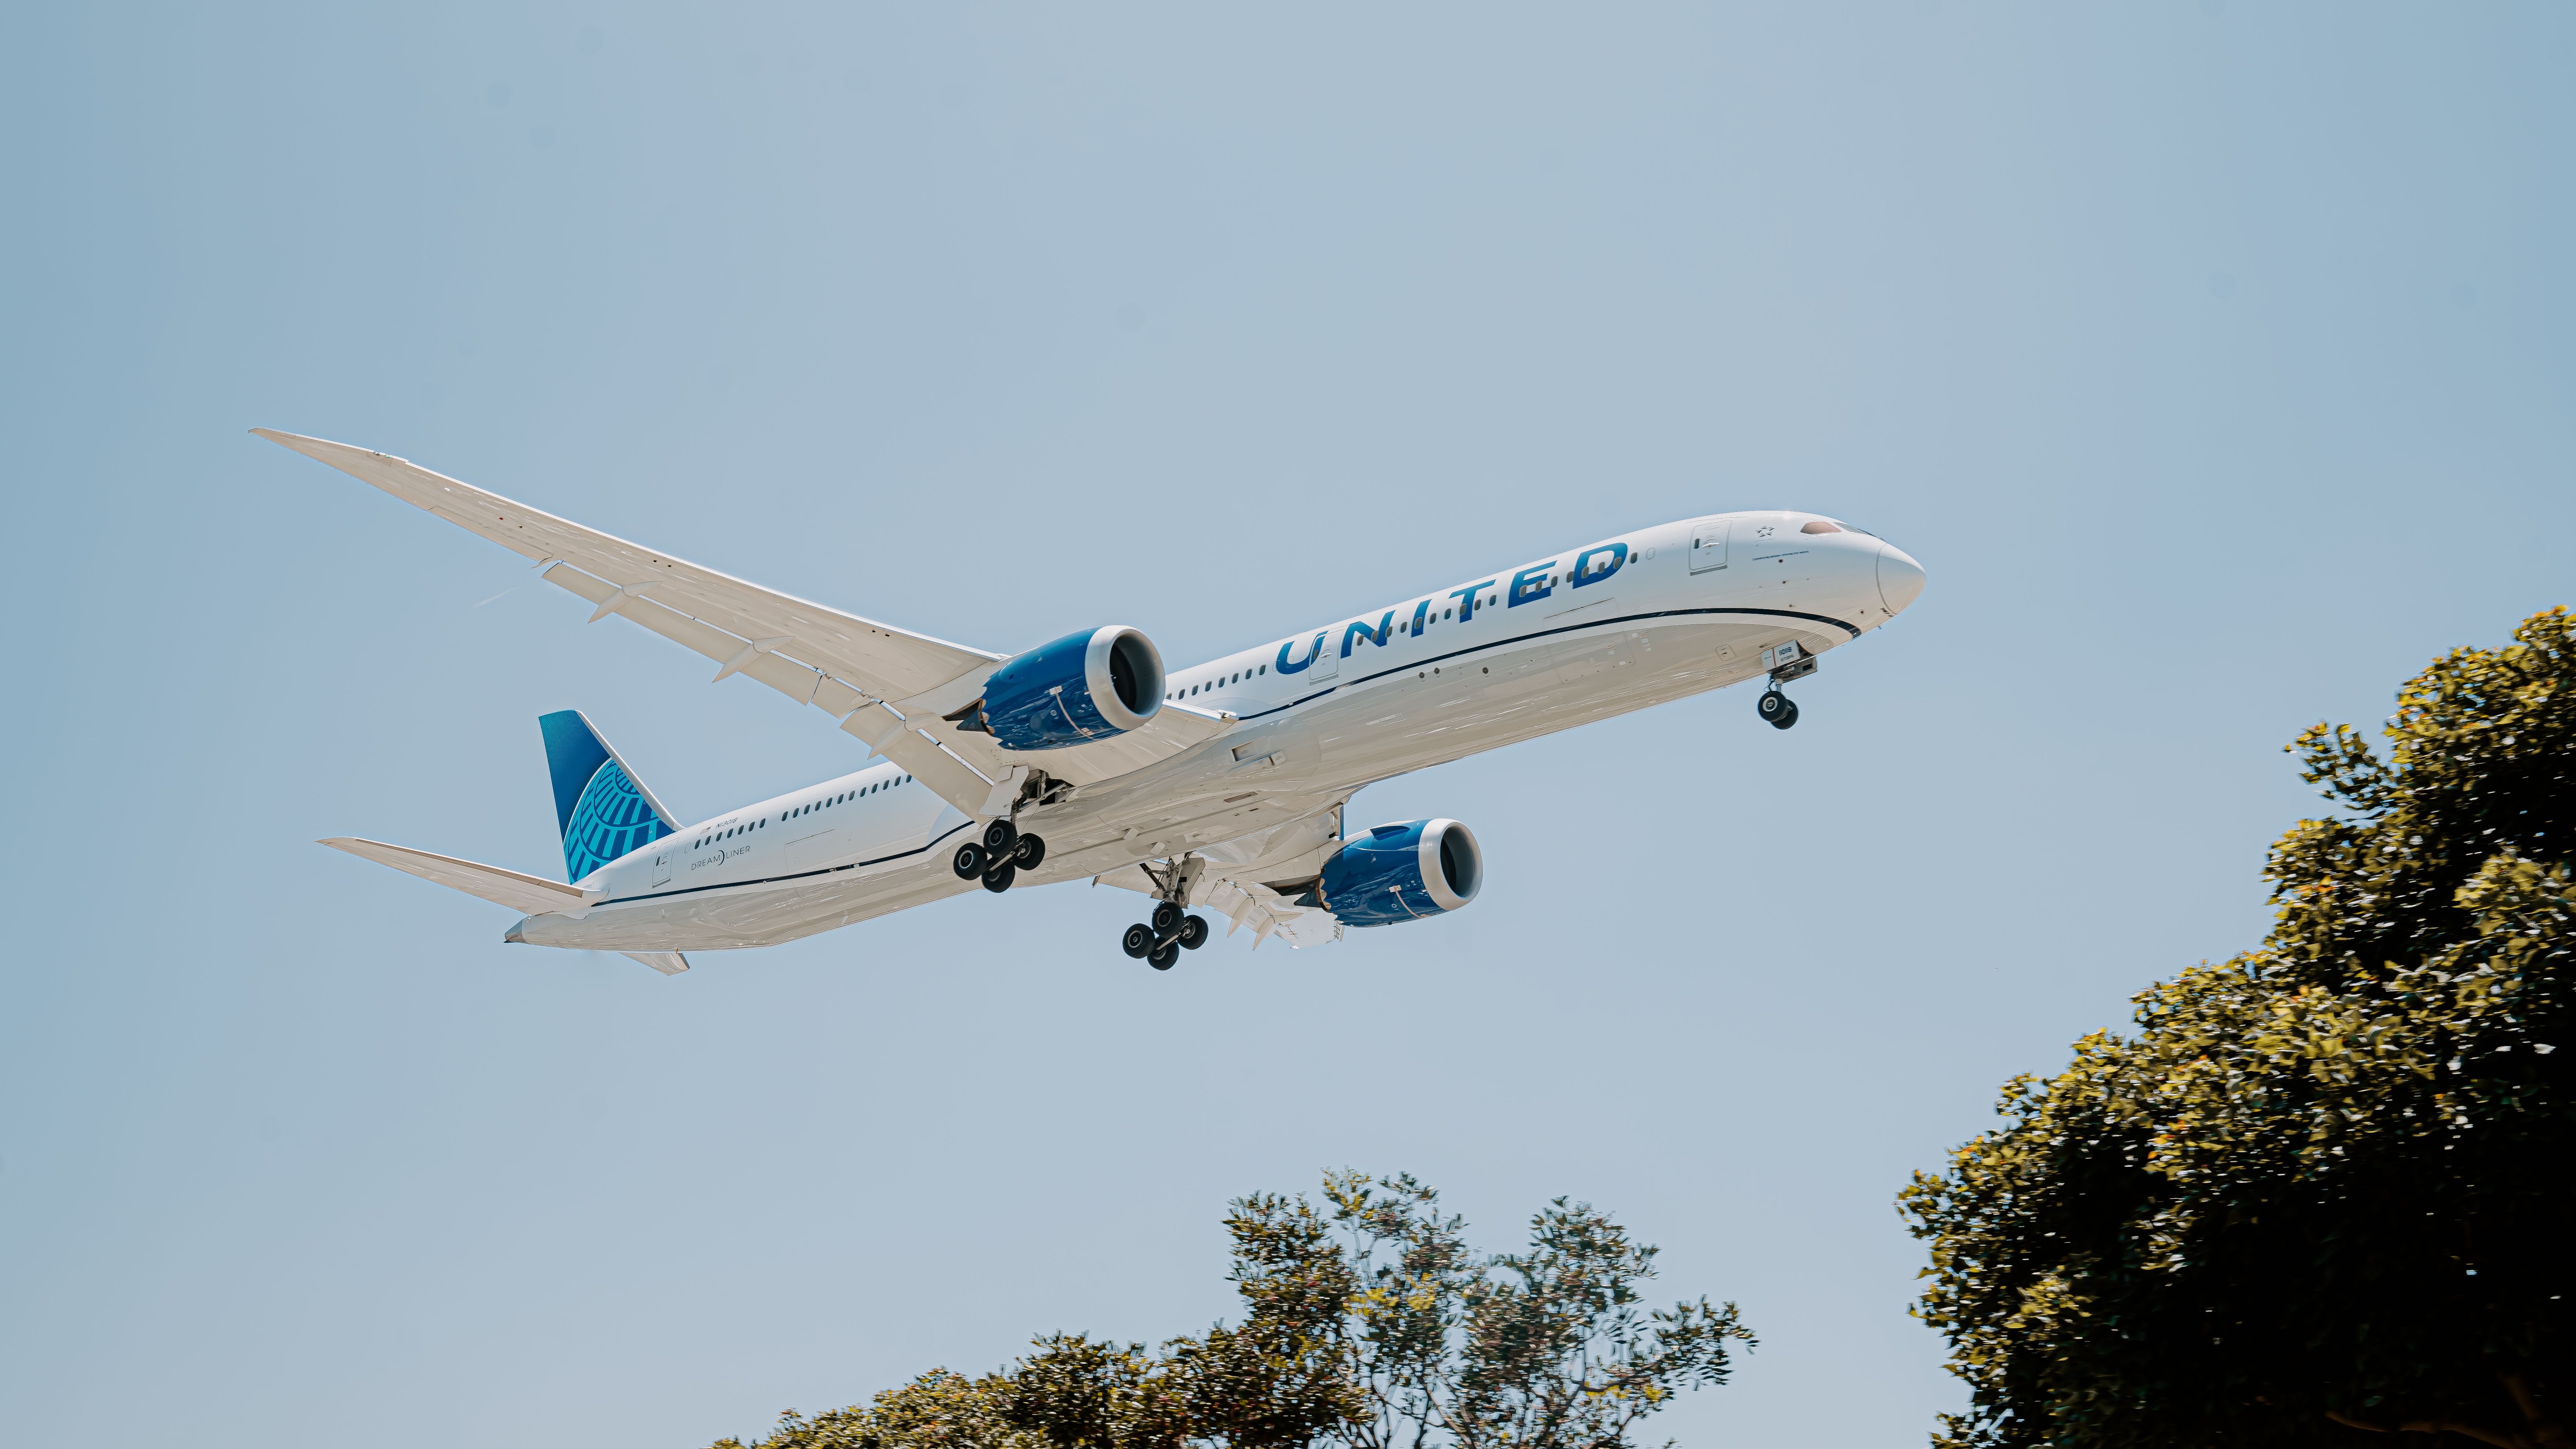 A United Airlines Boeing 787-10 about to land at LAX.